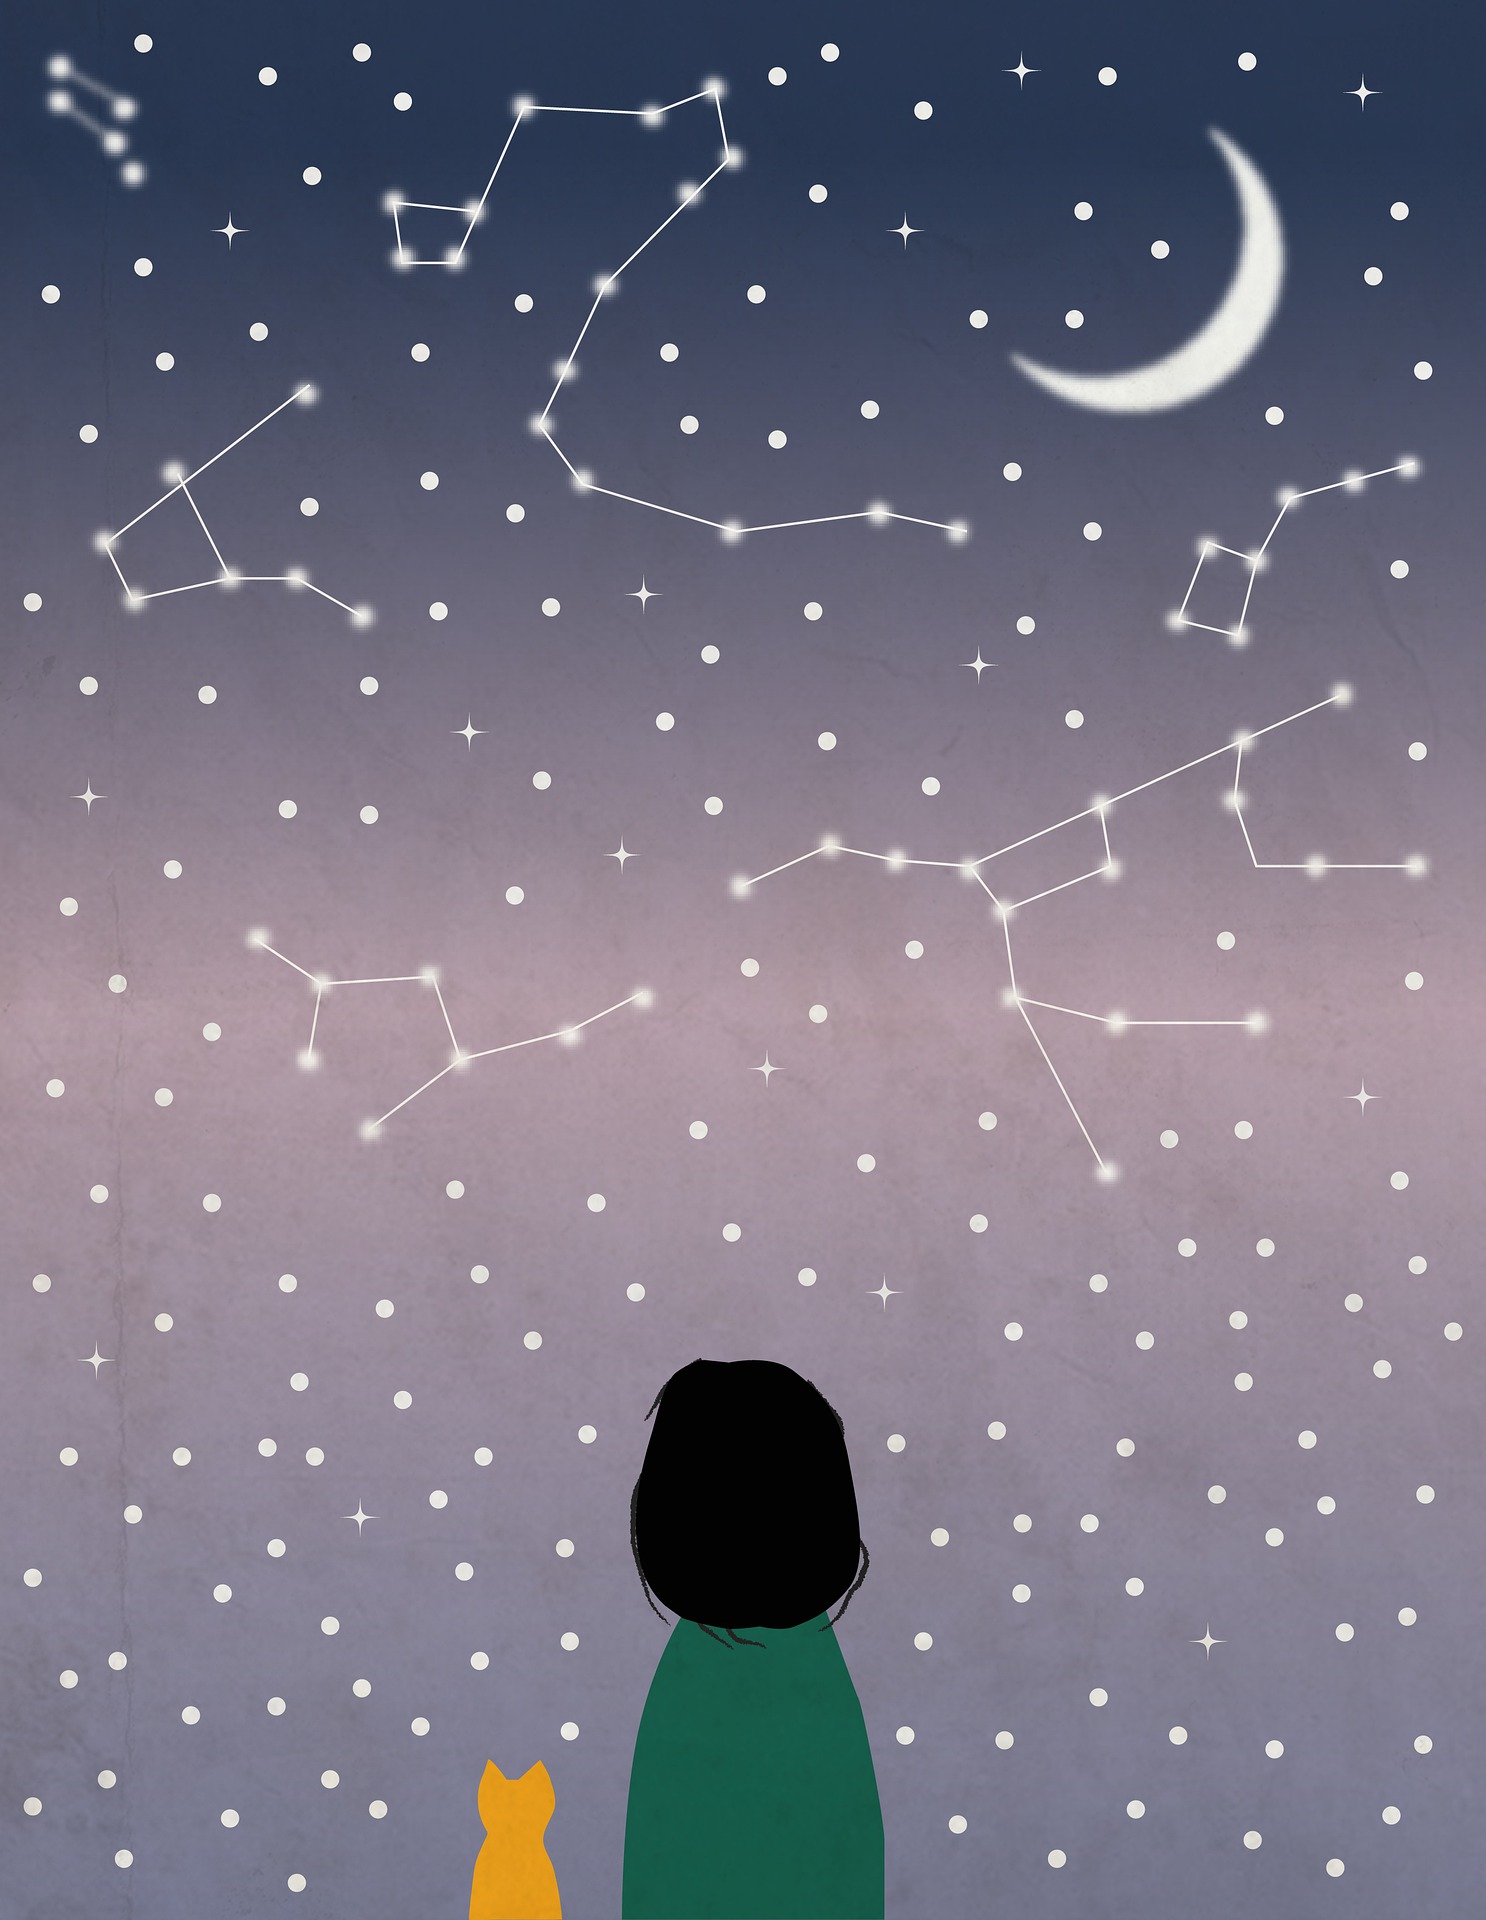 This image depicts a person and a cat looking up at the night sky, which is full of stars. 